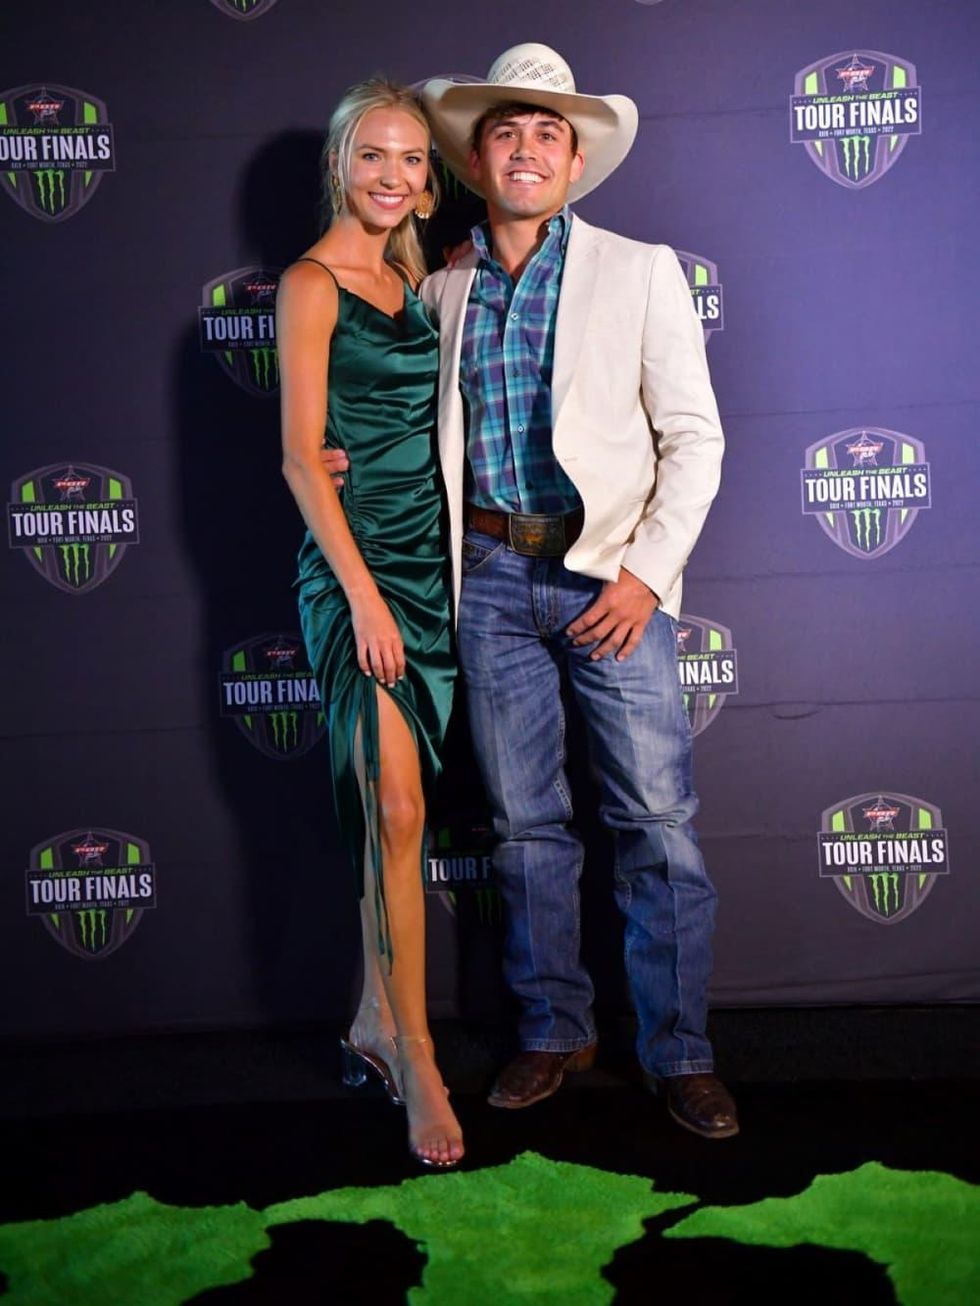 PBR World Finals kicks off in Fort Worth with glamorous awards gala